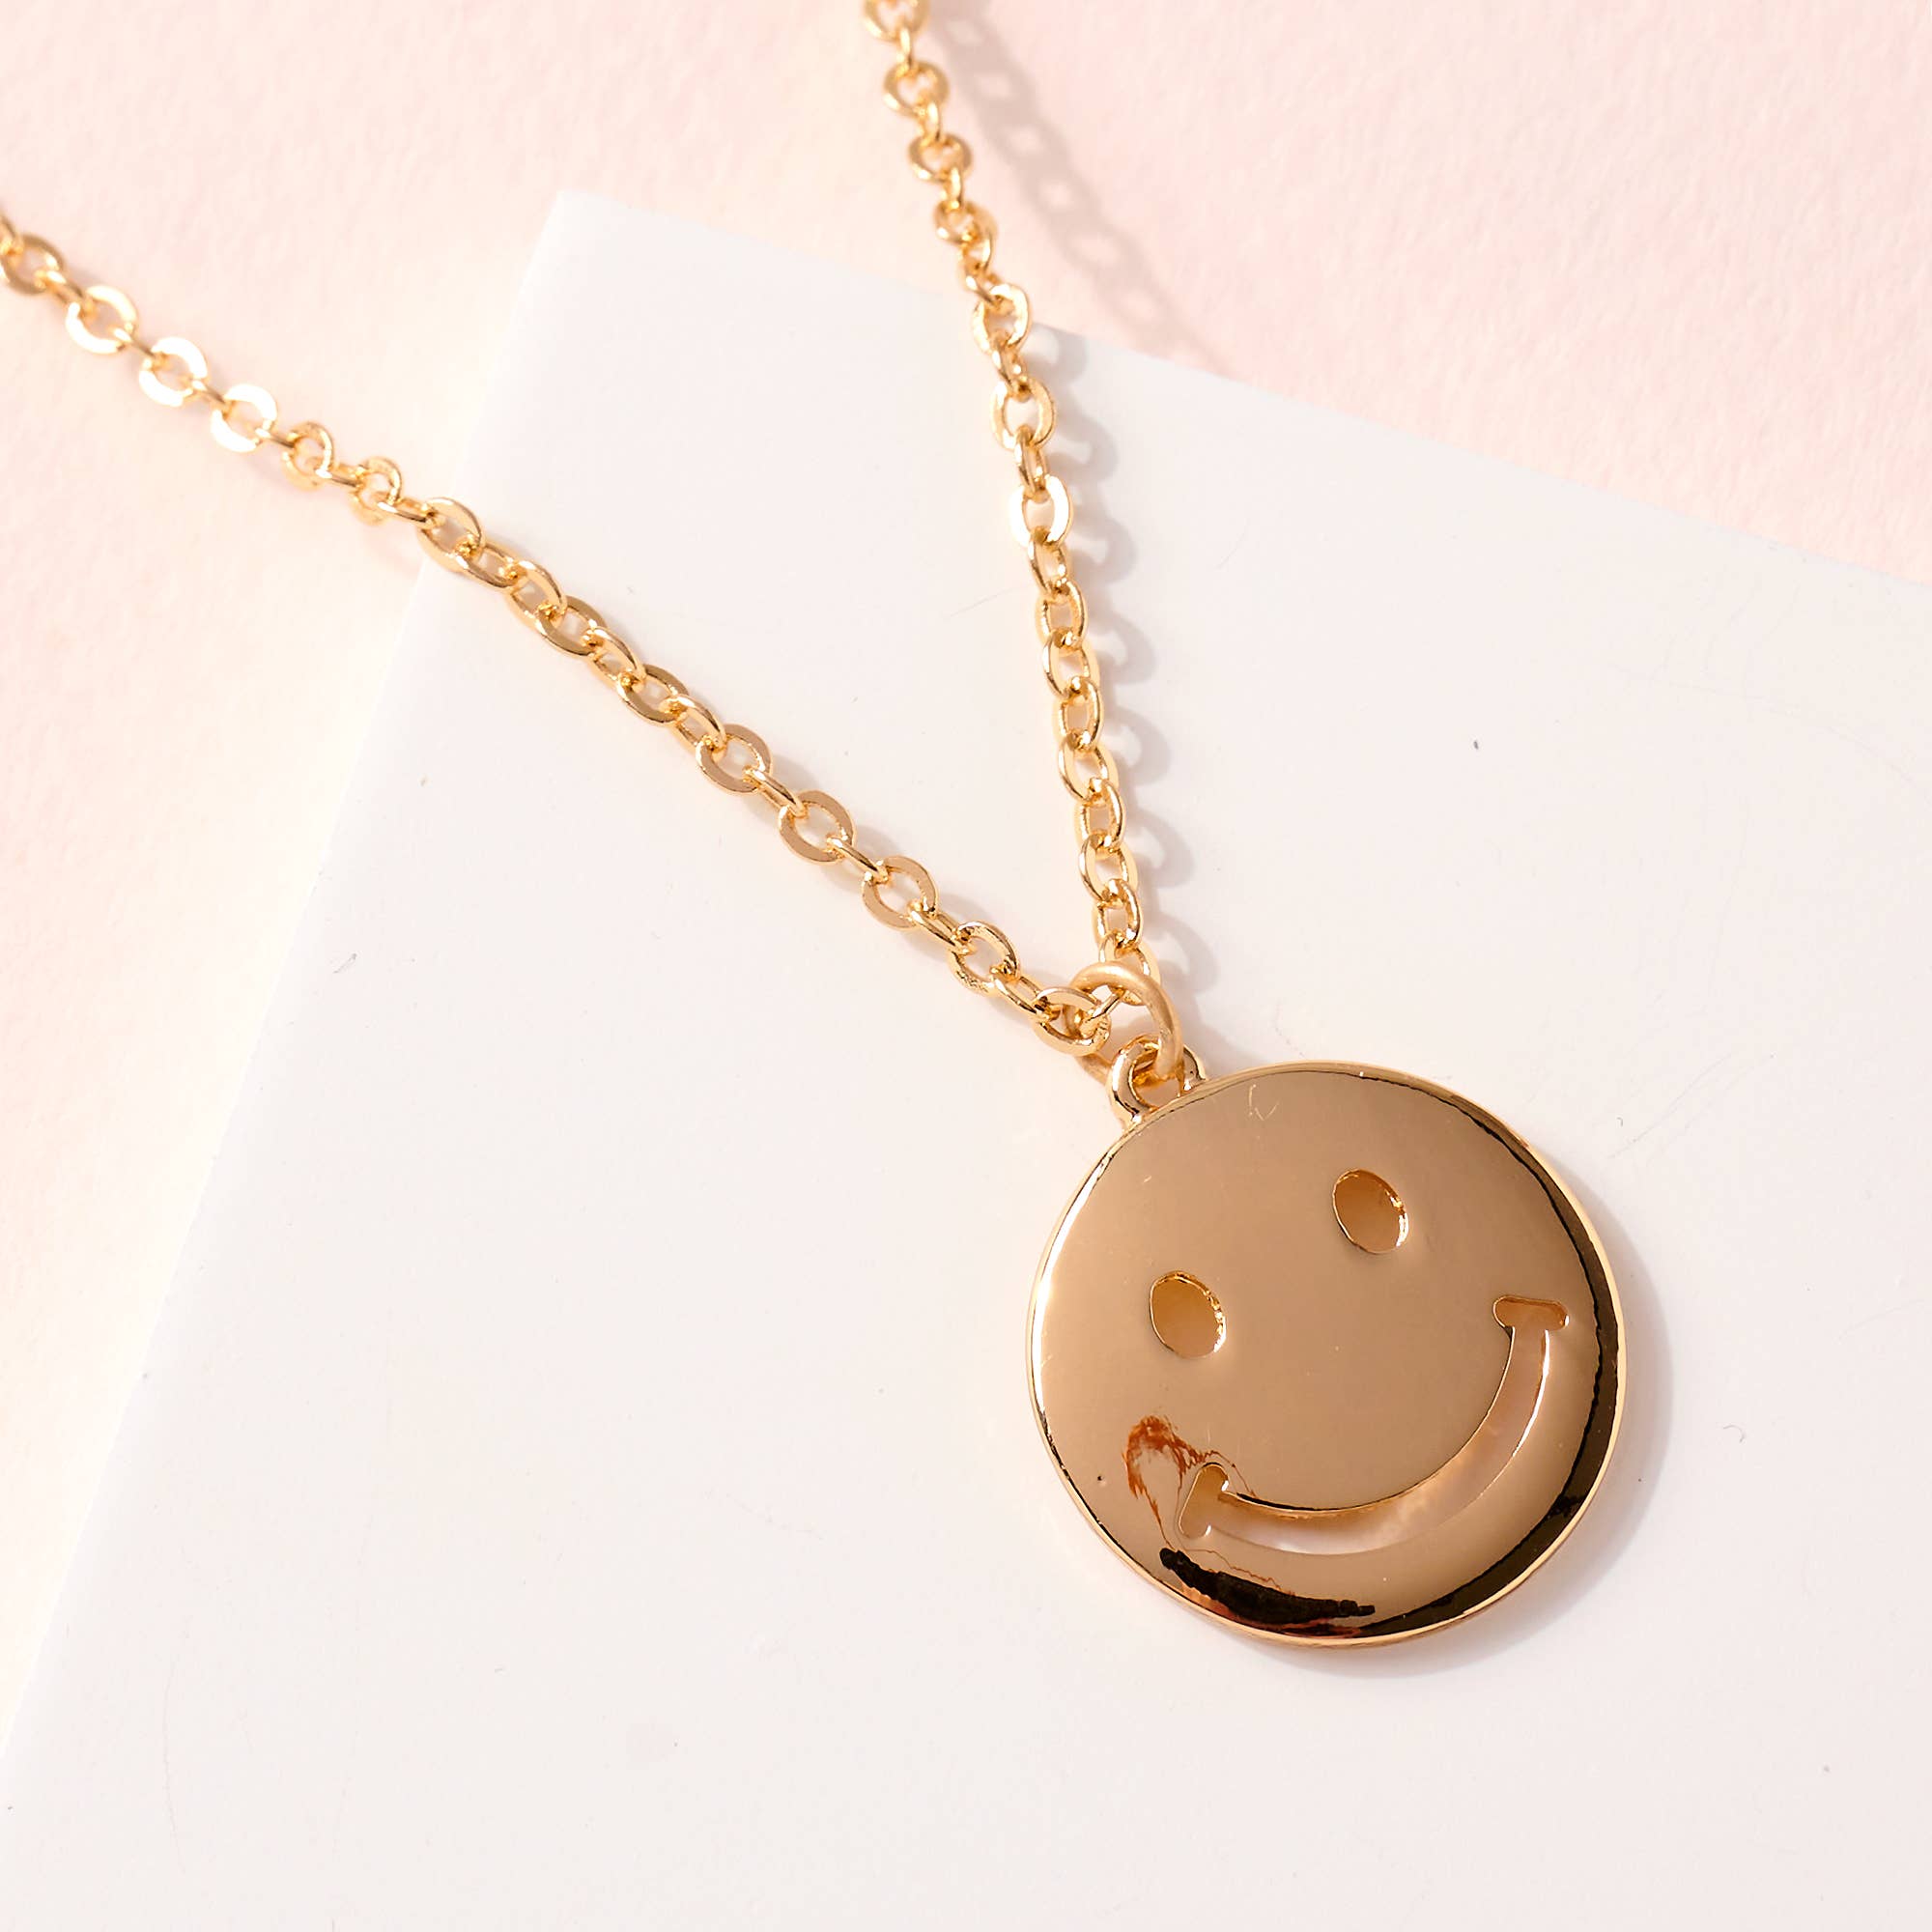 Smiley Face Round Charm Short Necklace